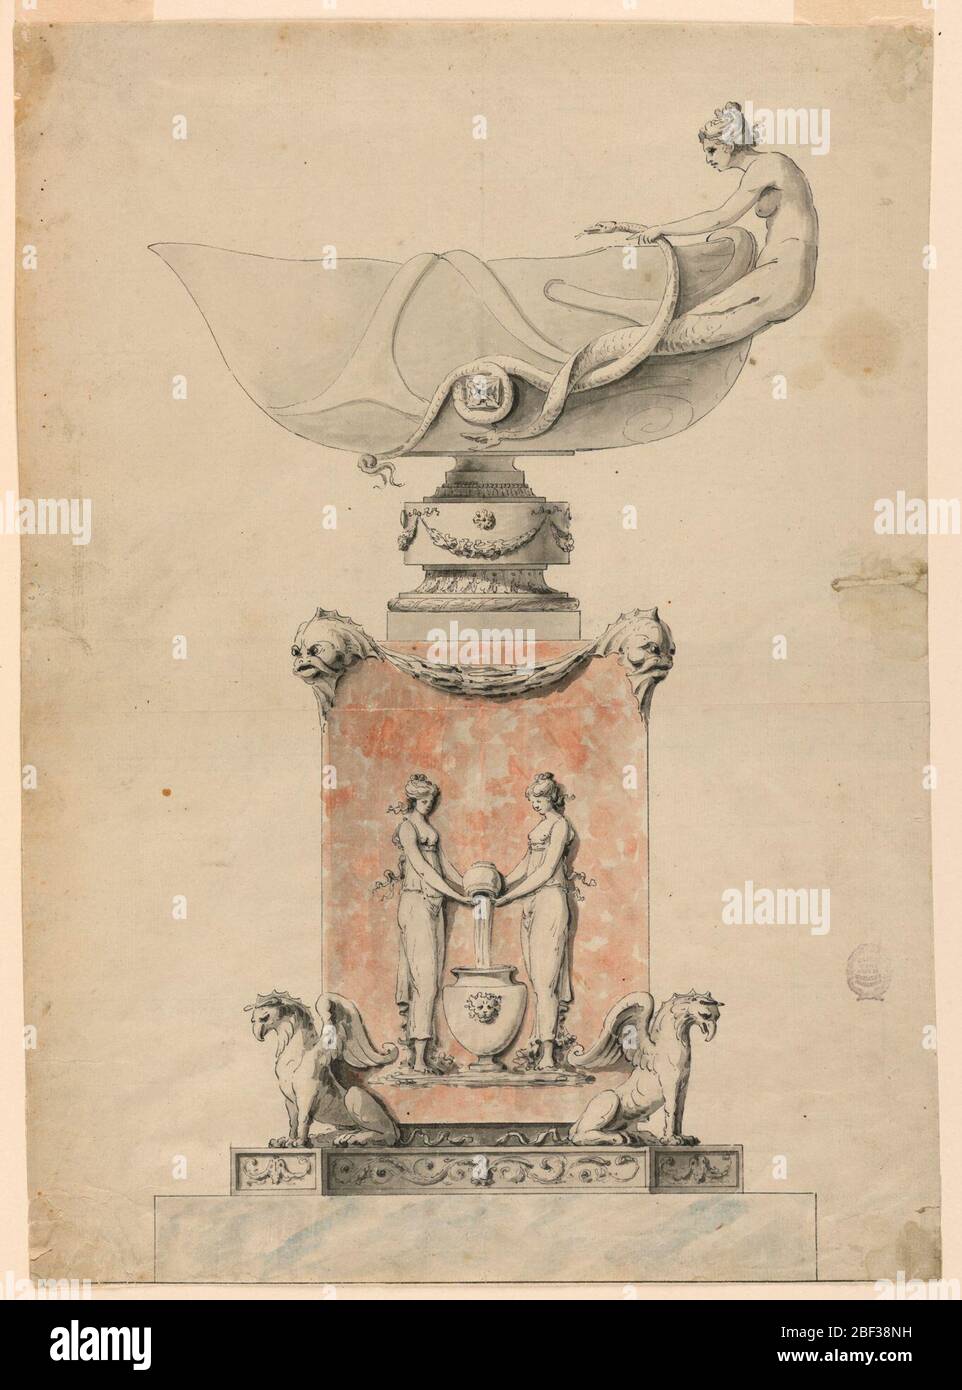 Design for a Pedestal and a Bowl Intended for Execution in White and Rose Marbles for Marie Antoinette at St Cloud. The pedestal stands upon a base. It is supported at the corners by obliquely disposed griffins. A relief at its front shows two girls pouring water from a jar into an urn. Dolphin masks support festoons above. The bowl has a foot. Stock Photo